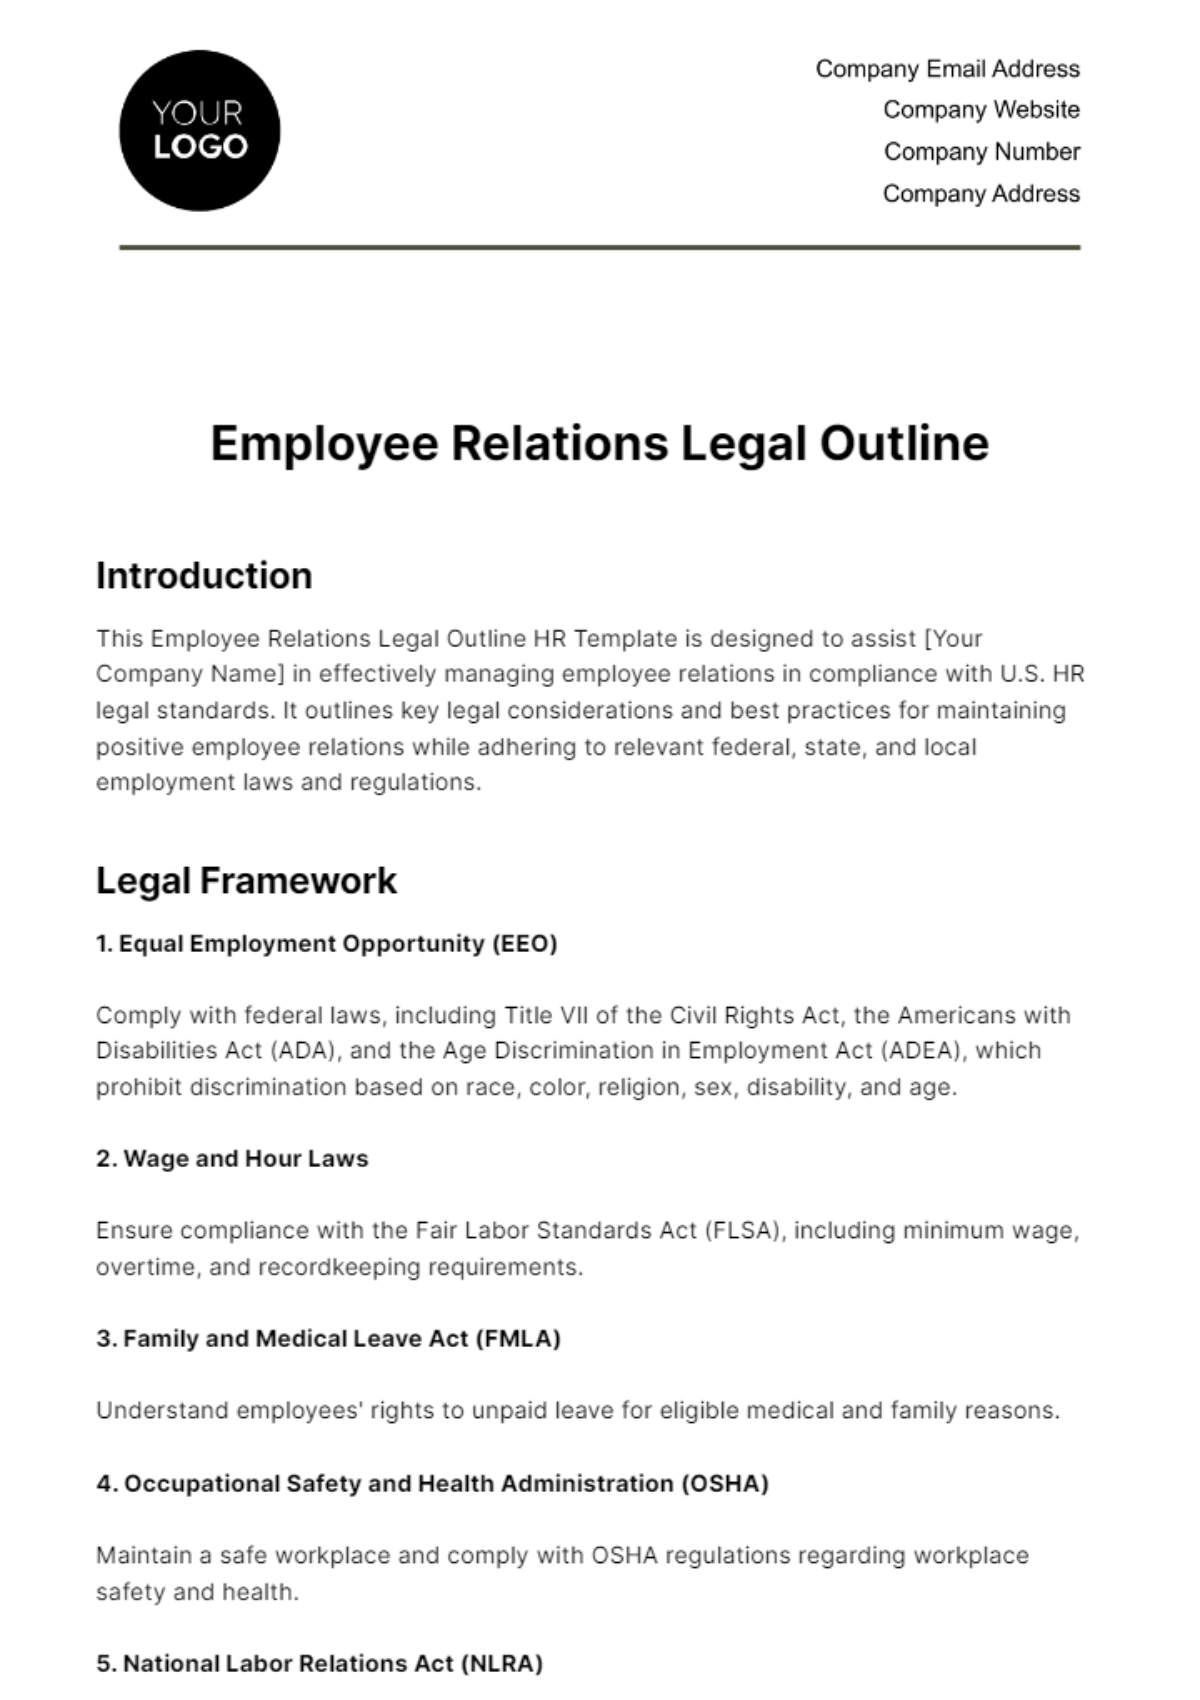 Employee Relations Legal Outline HR Template